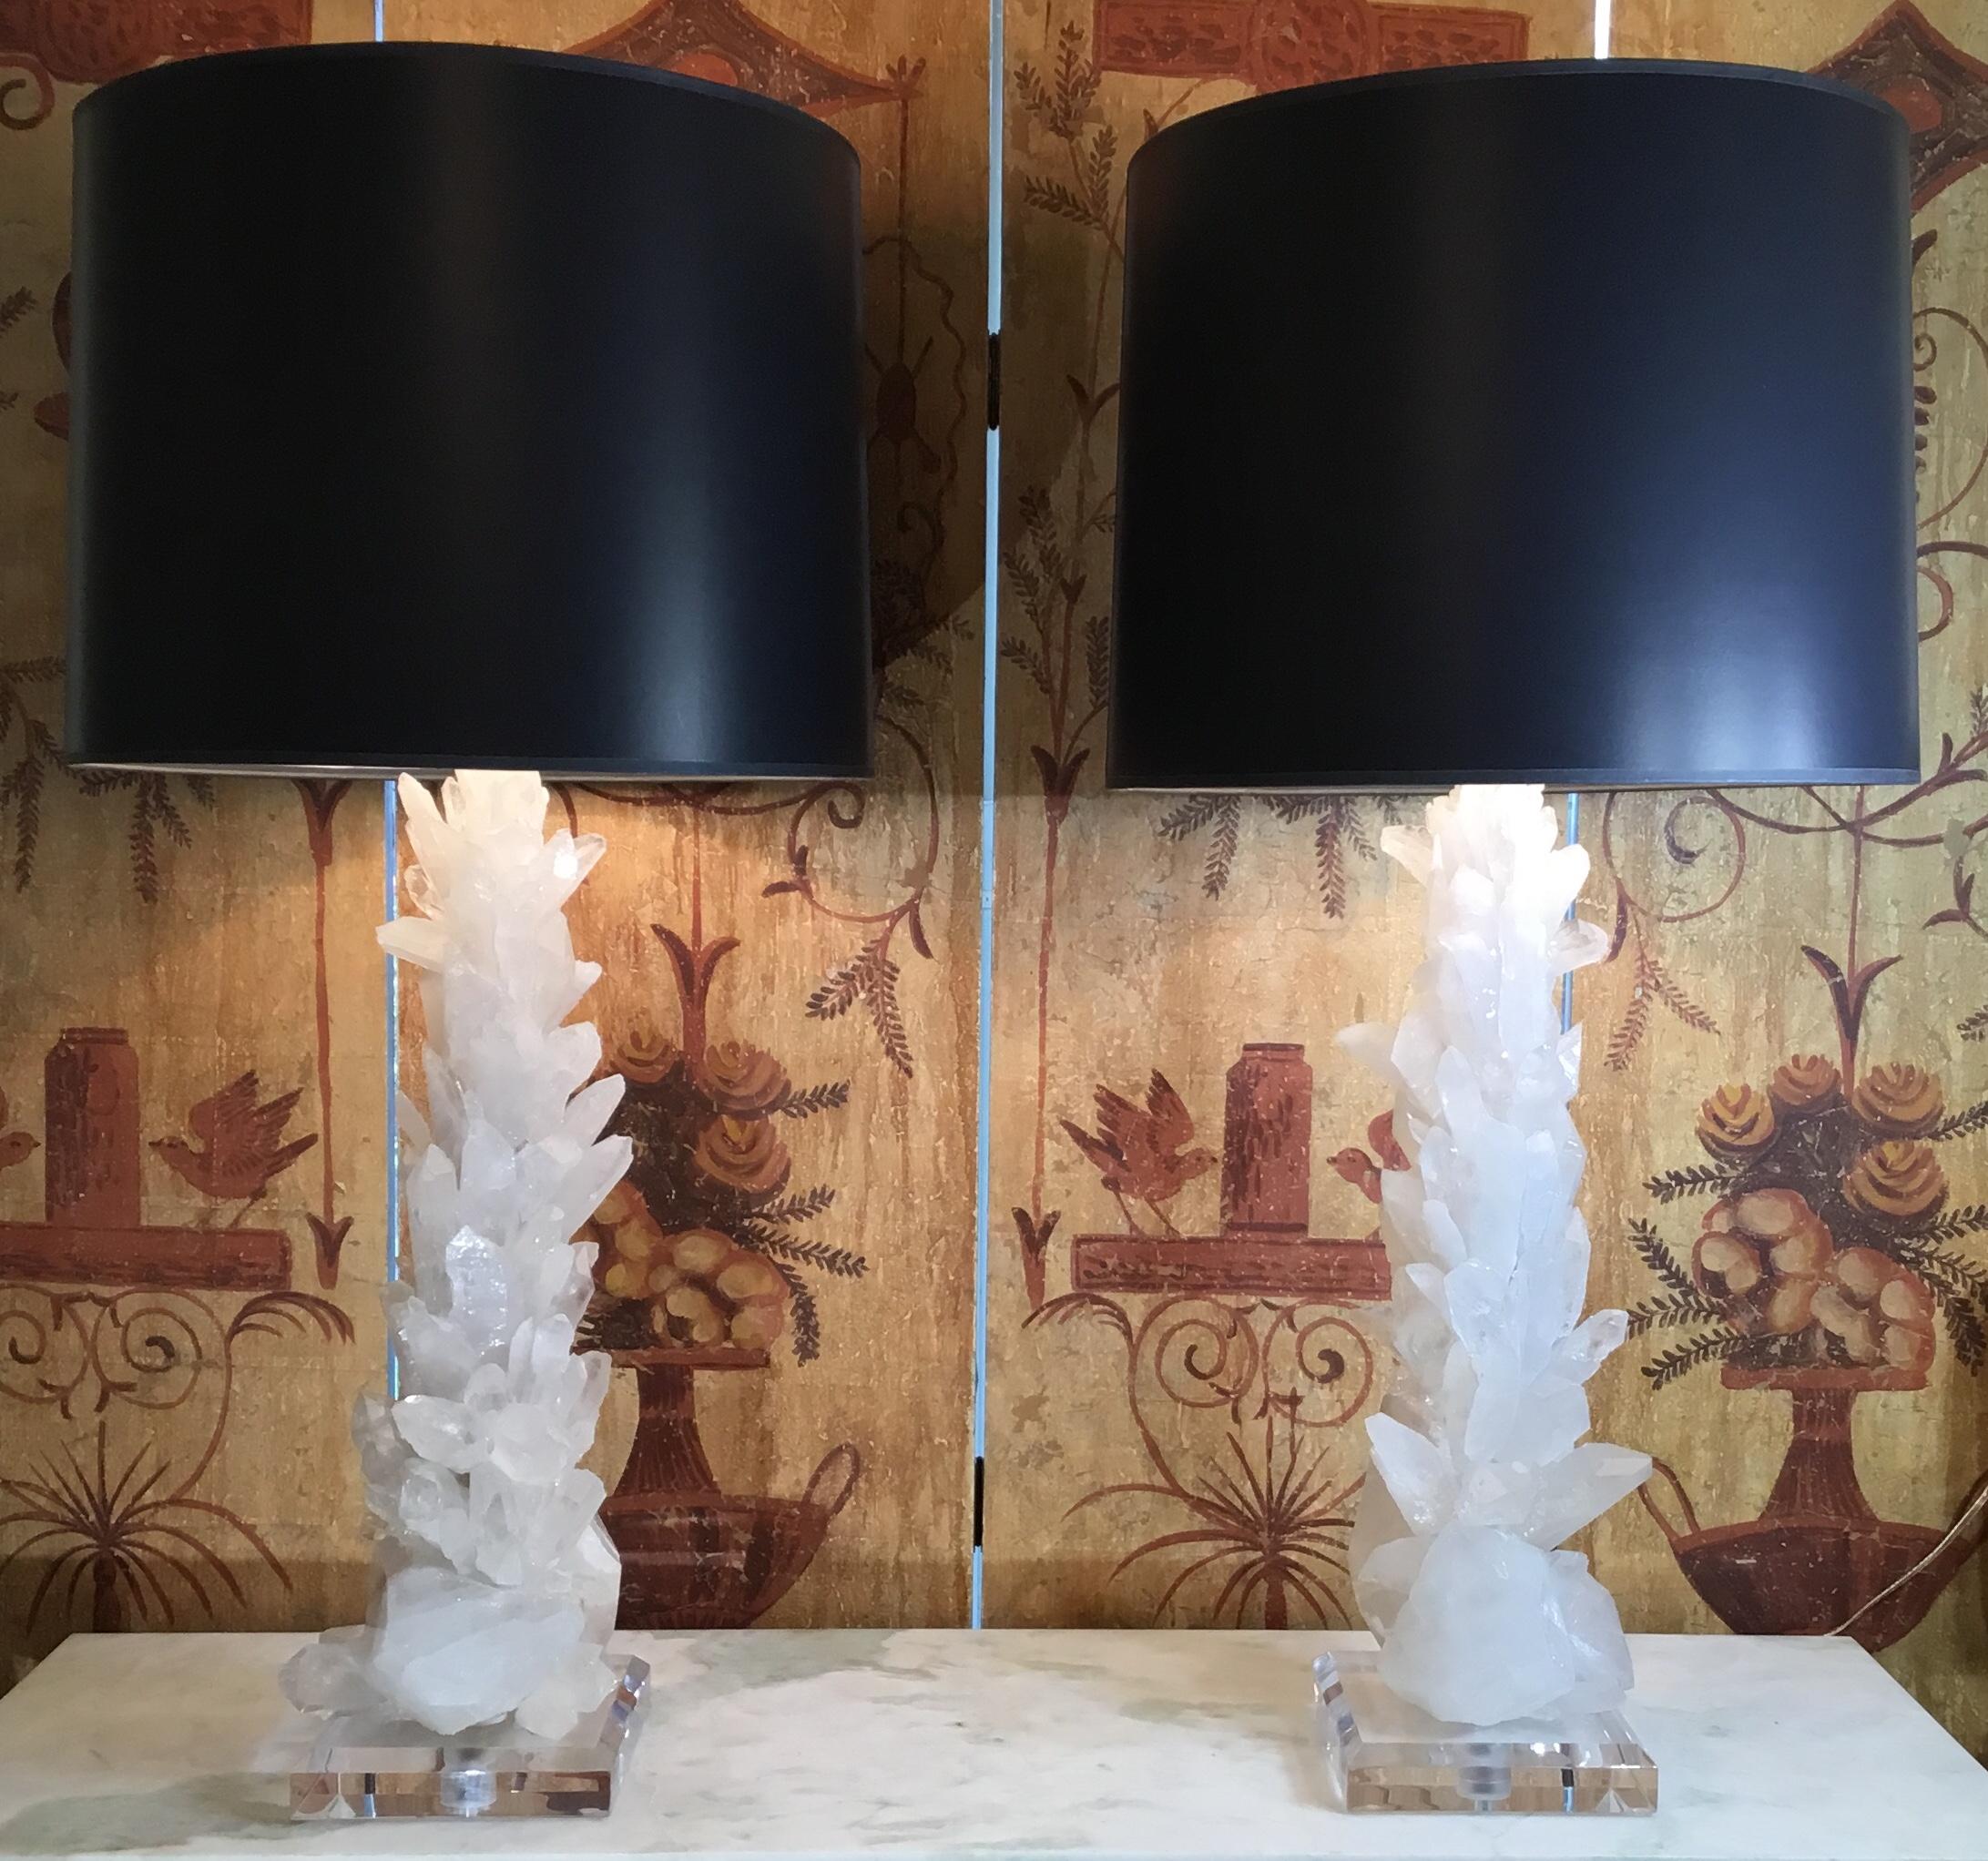 One of a kind pair of table lamps made of genuine crystal quartz shards and crystal points in white colors ,artistically put together to make beautiful and impressive pieces of object of art for display.
Bevelled clear Lucite base, size: 7” x 7” x